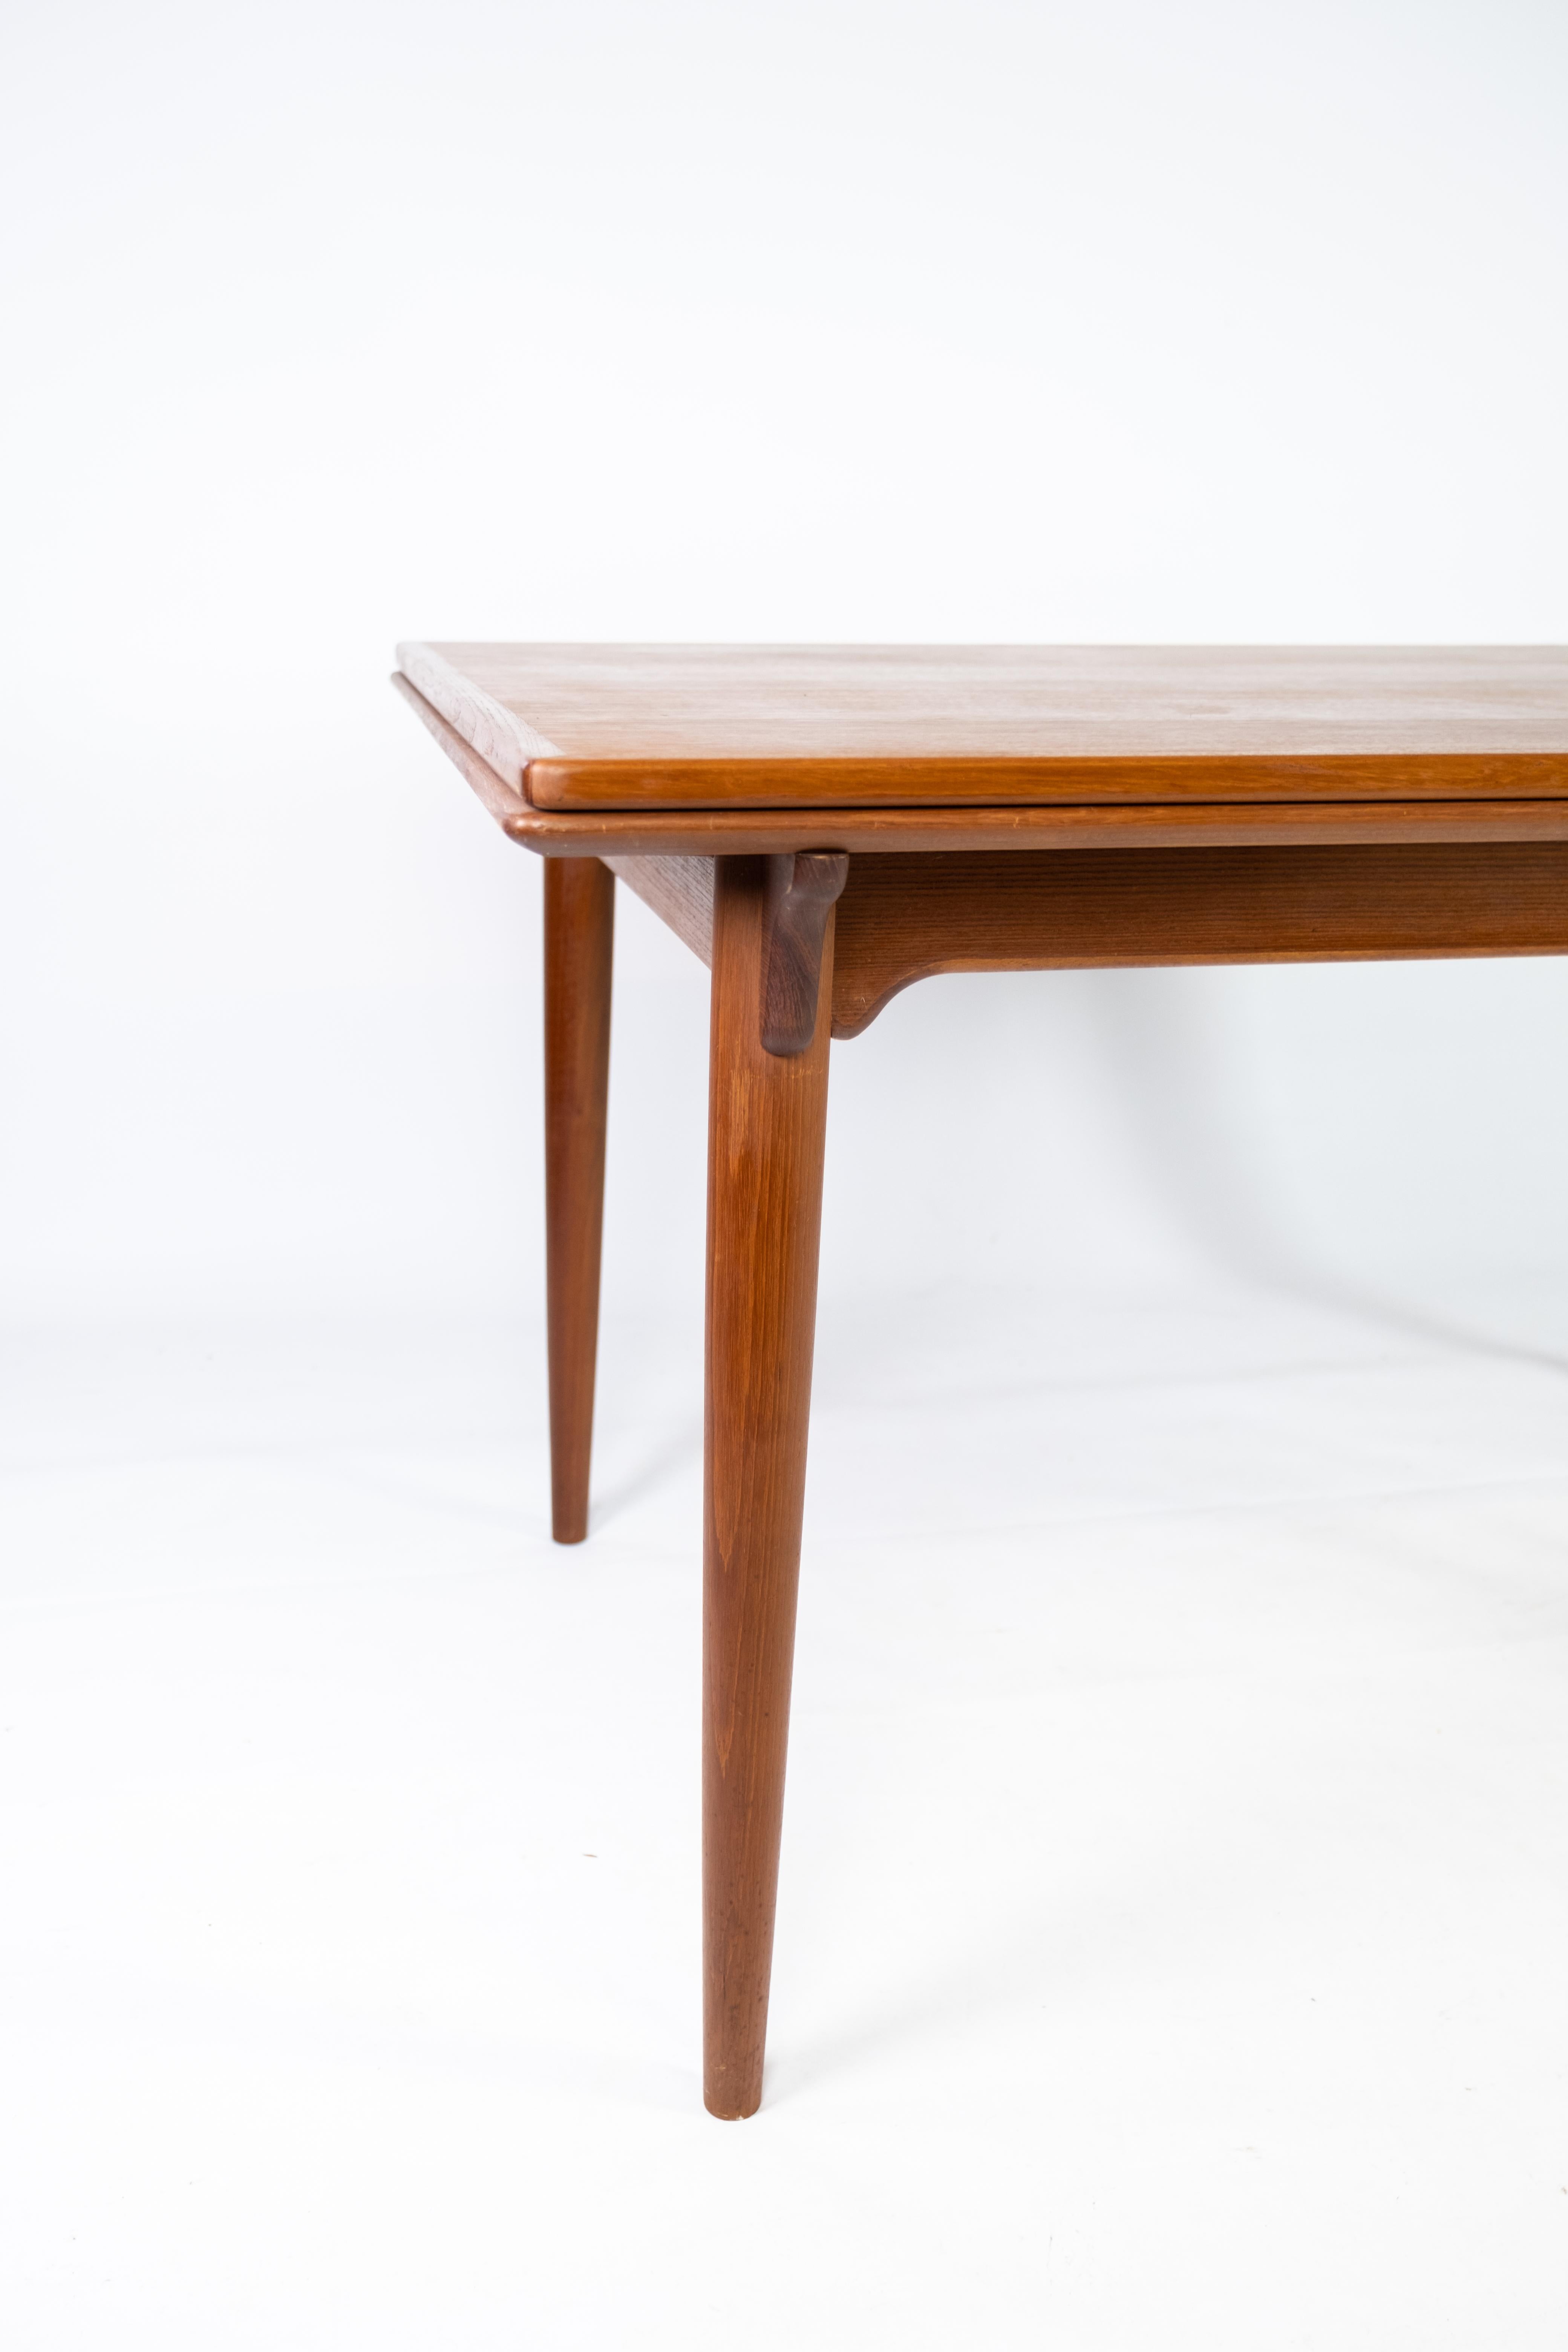 Mid-Century Modern Dining Table Made In Teak With Extentions, Danish Design From 1960s For Sale